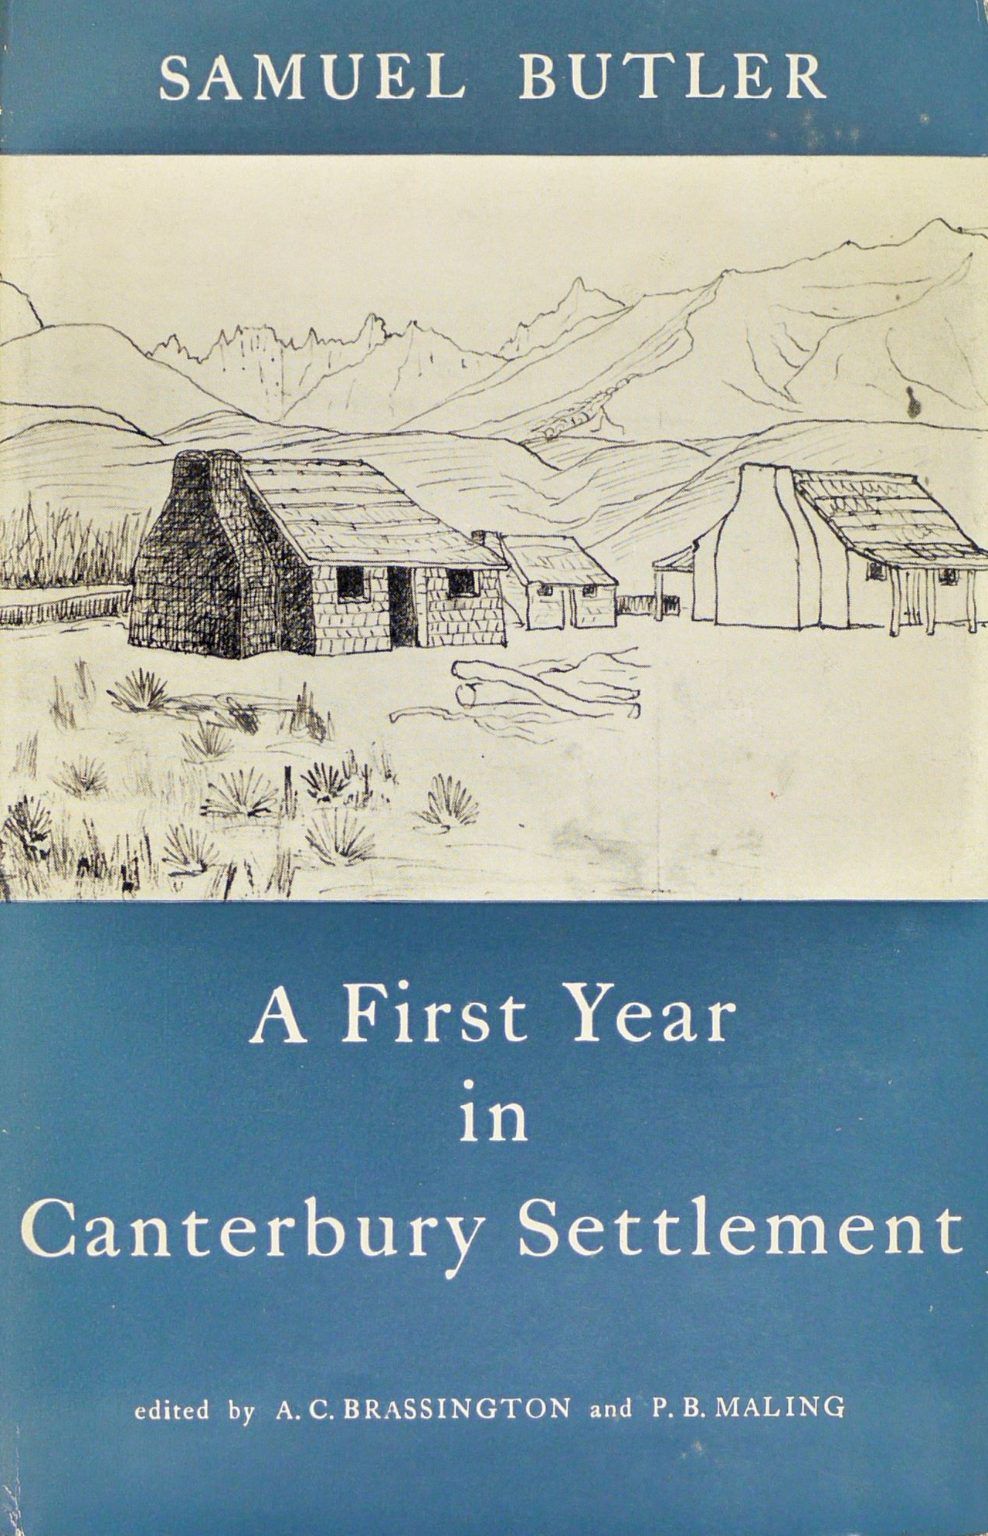 A FIRST YEAR IN CANTERBURY SETTLEMENT